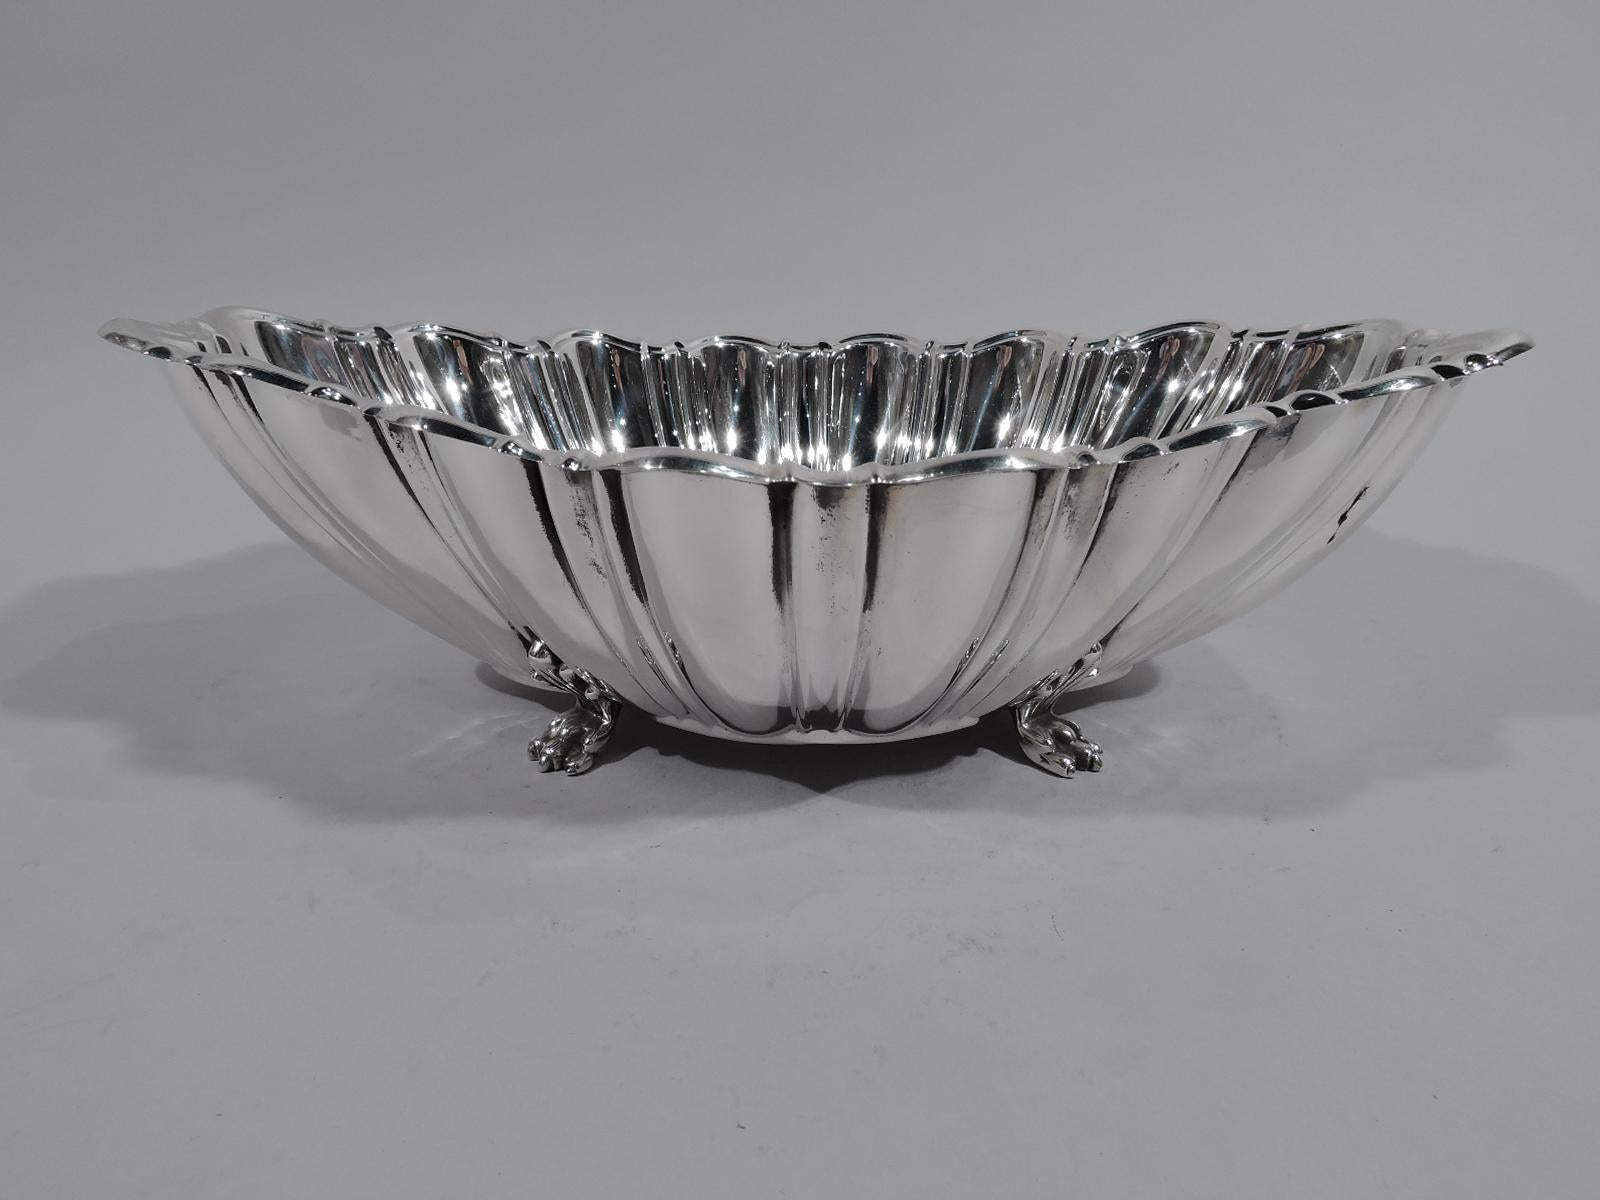 Modern classical sterling silver centerpiece bowl. Made by Reed & Barton in Taunton, Mass. in 1950. Quatrefoil well. Curved sides with alternating flutes and lobes. Scrolled rim. Rests on 4 scallop-shell mounted paw supports. A great revving up of